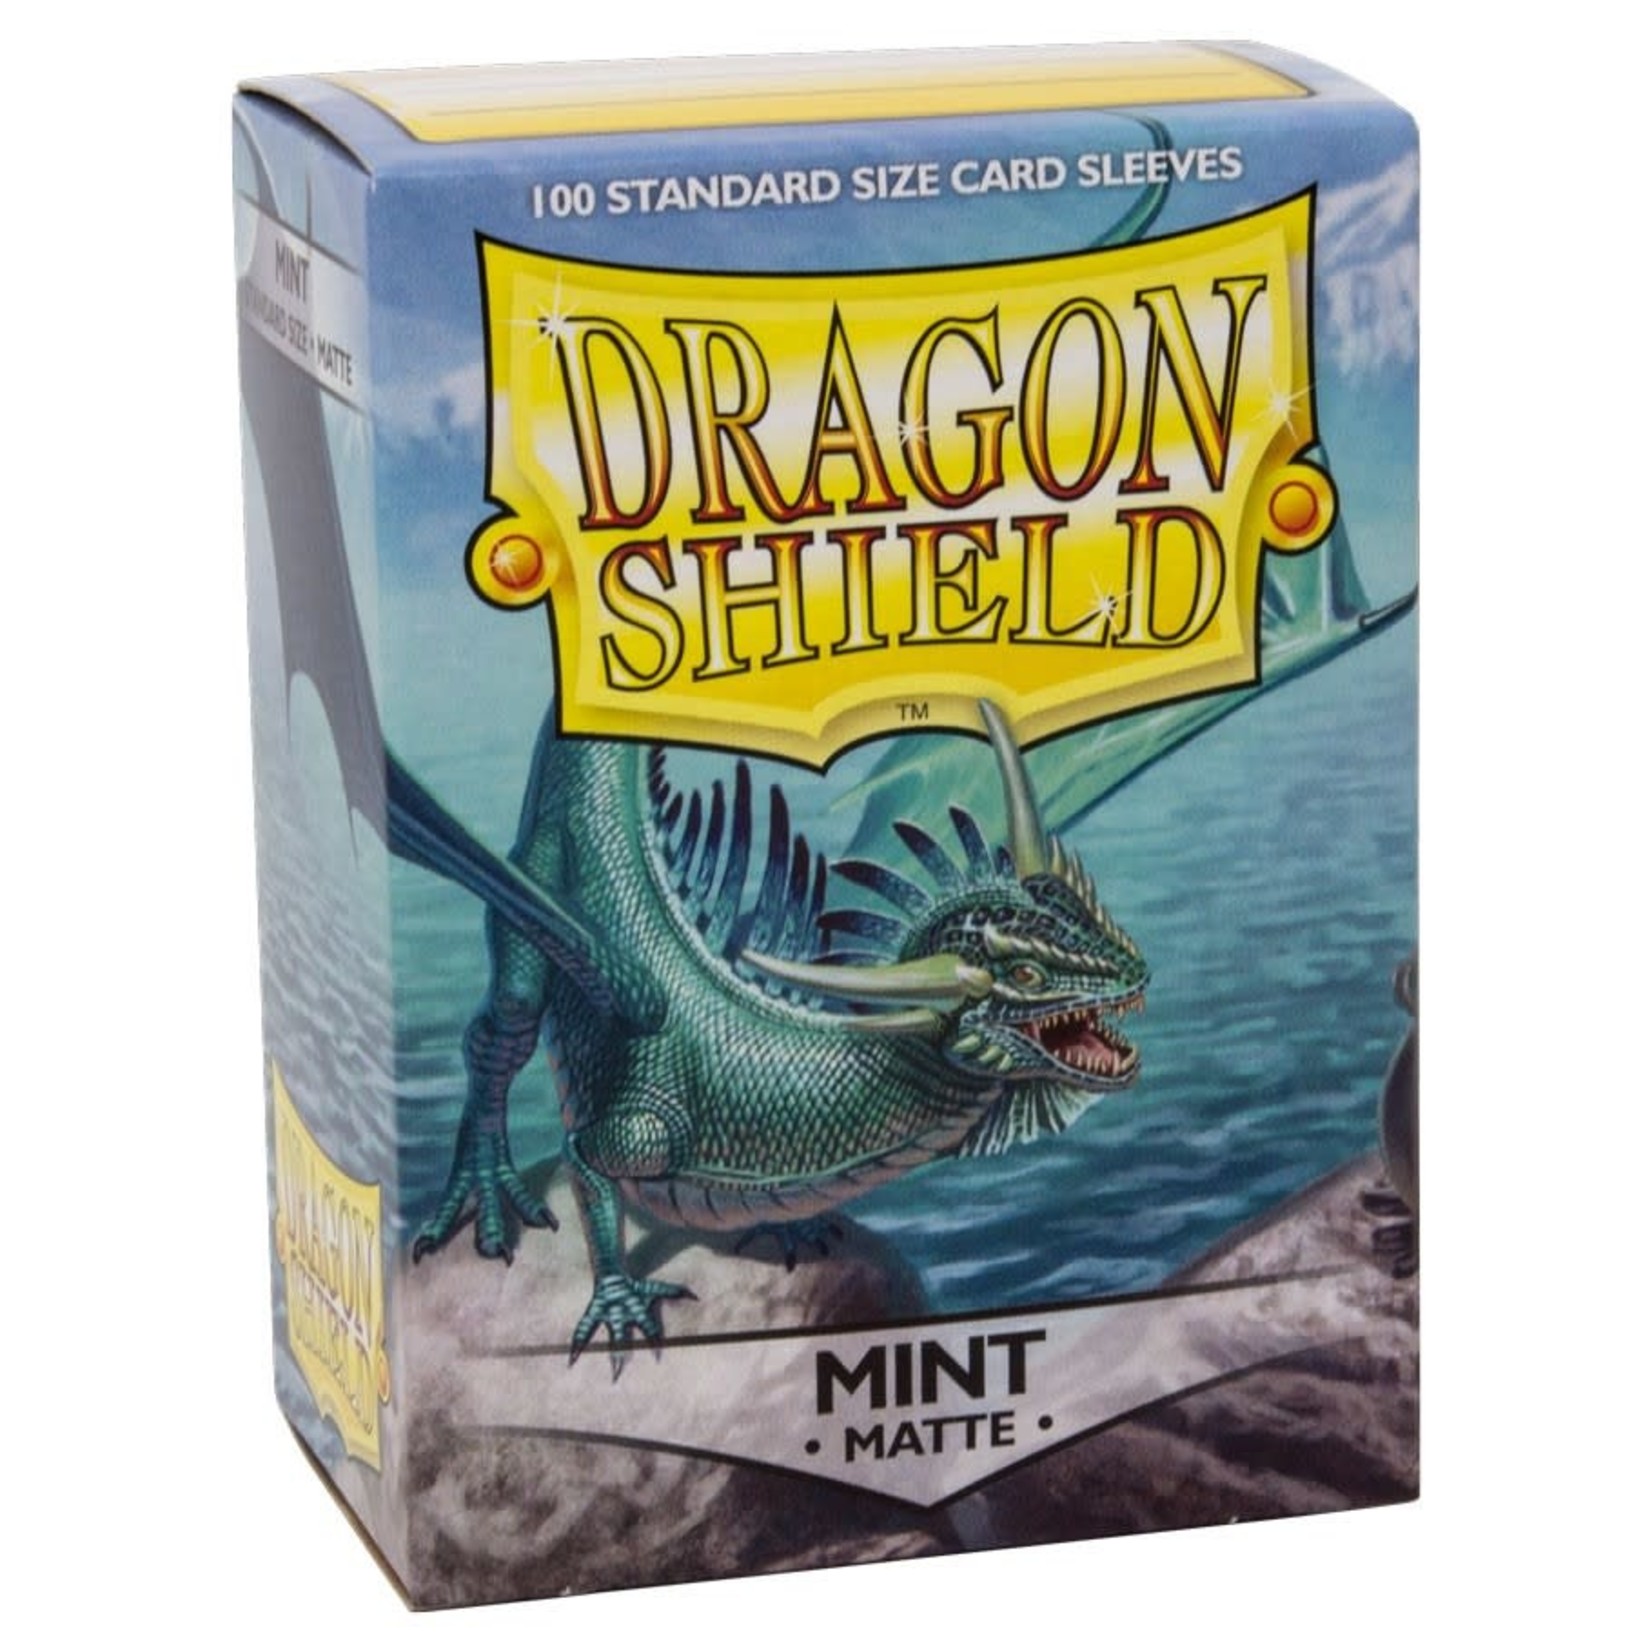 Dragon Shield Card Sleeves: Matte Mint (100 Count)